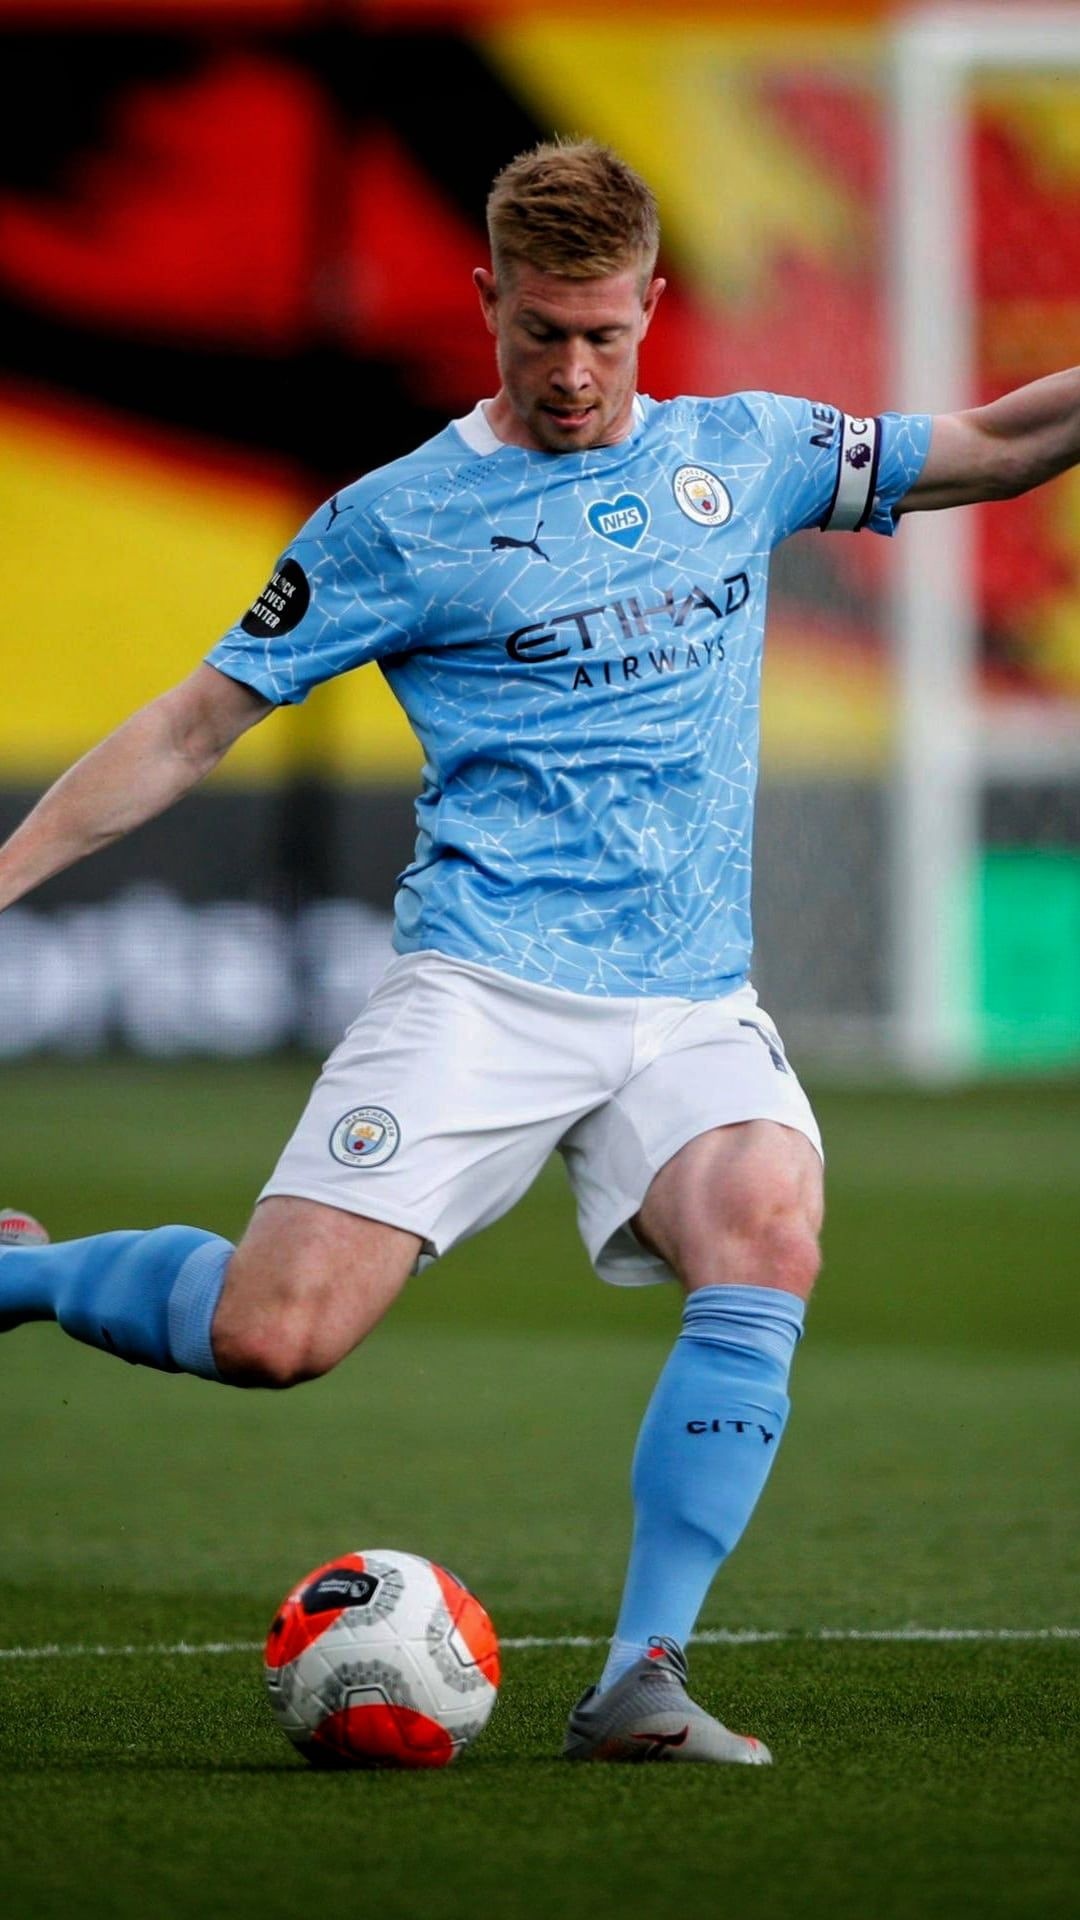 Kevin De Bruyne wallpapers, Best backgrounds, Download, 1080x1920 Full HD Phone